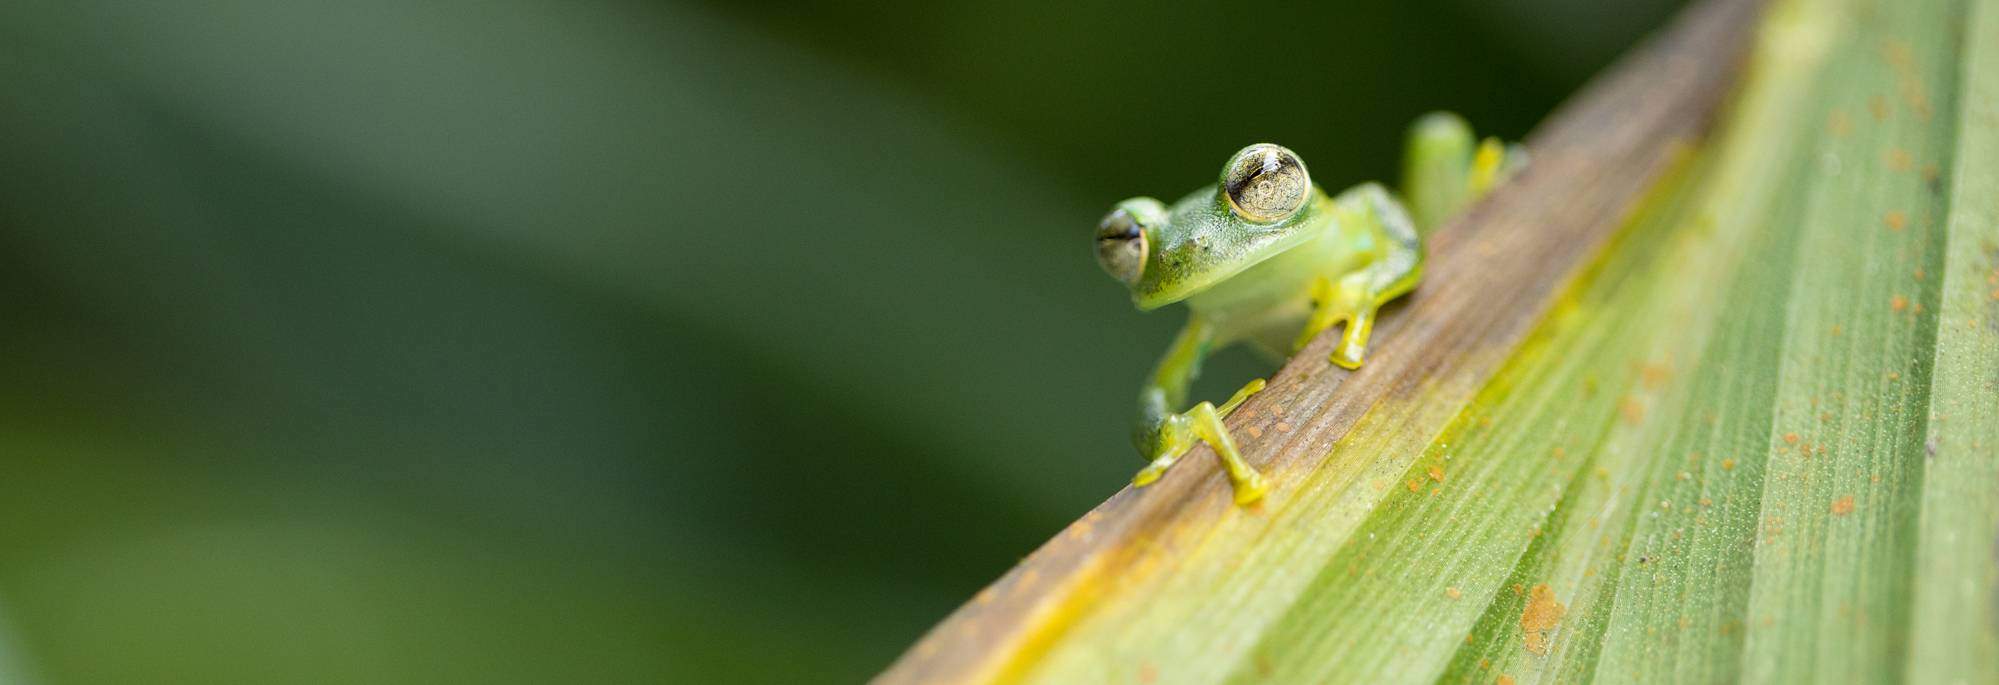 A green frog with big eyes perches on a leaf